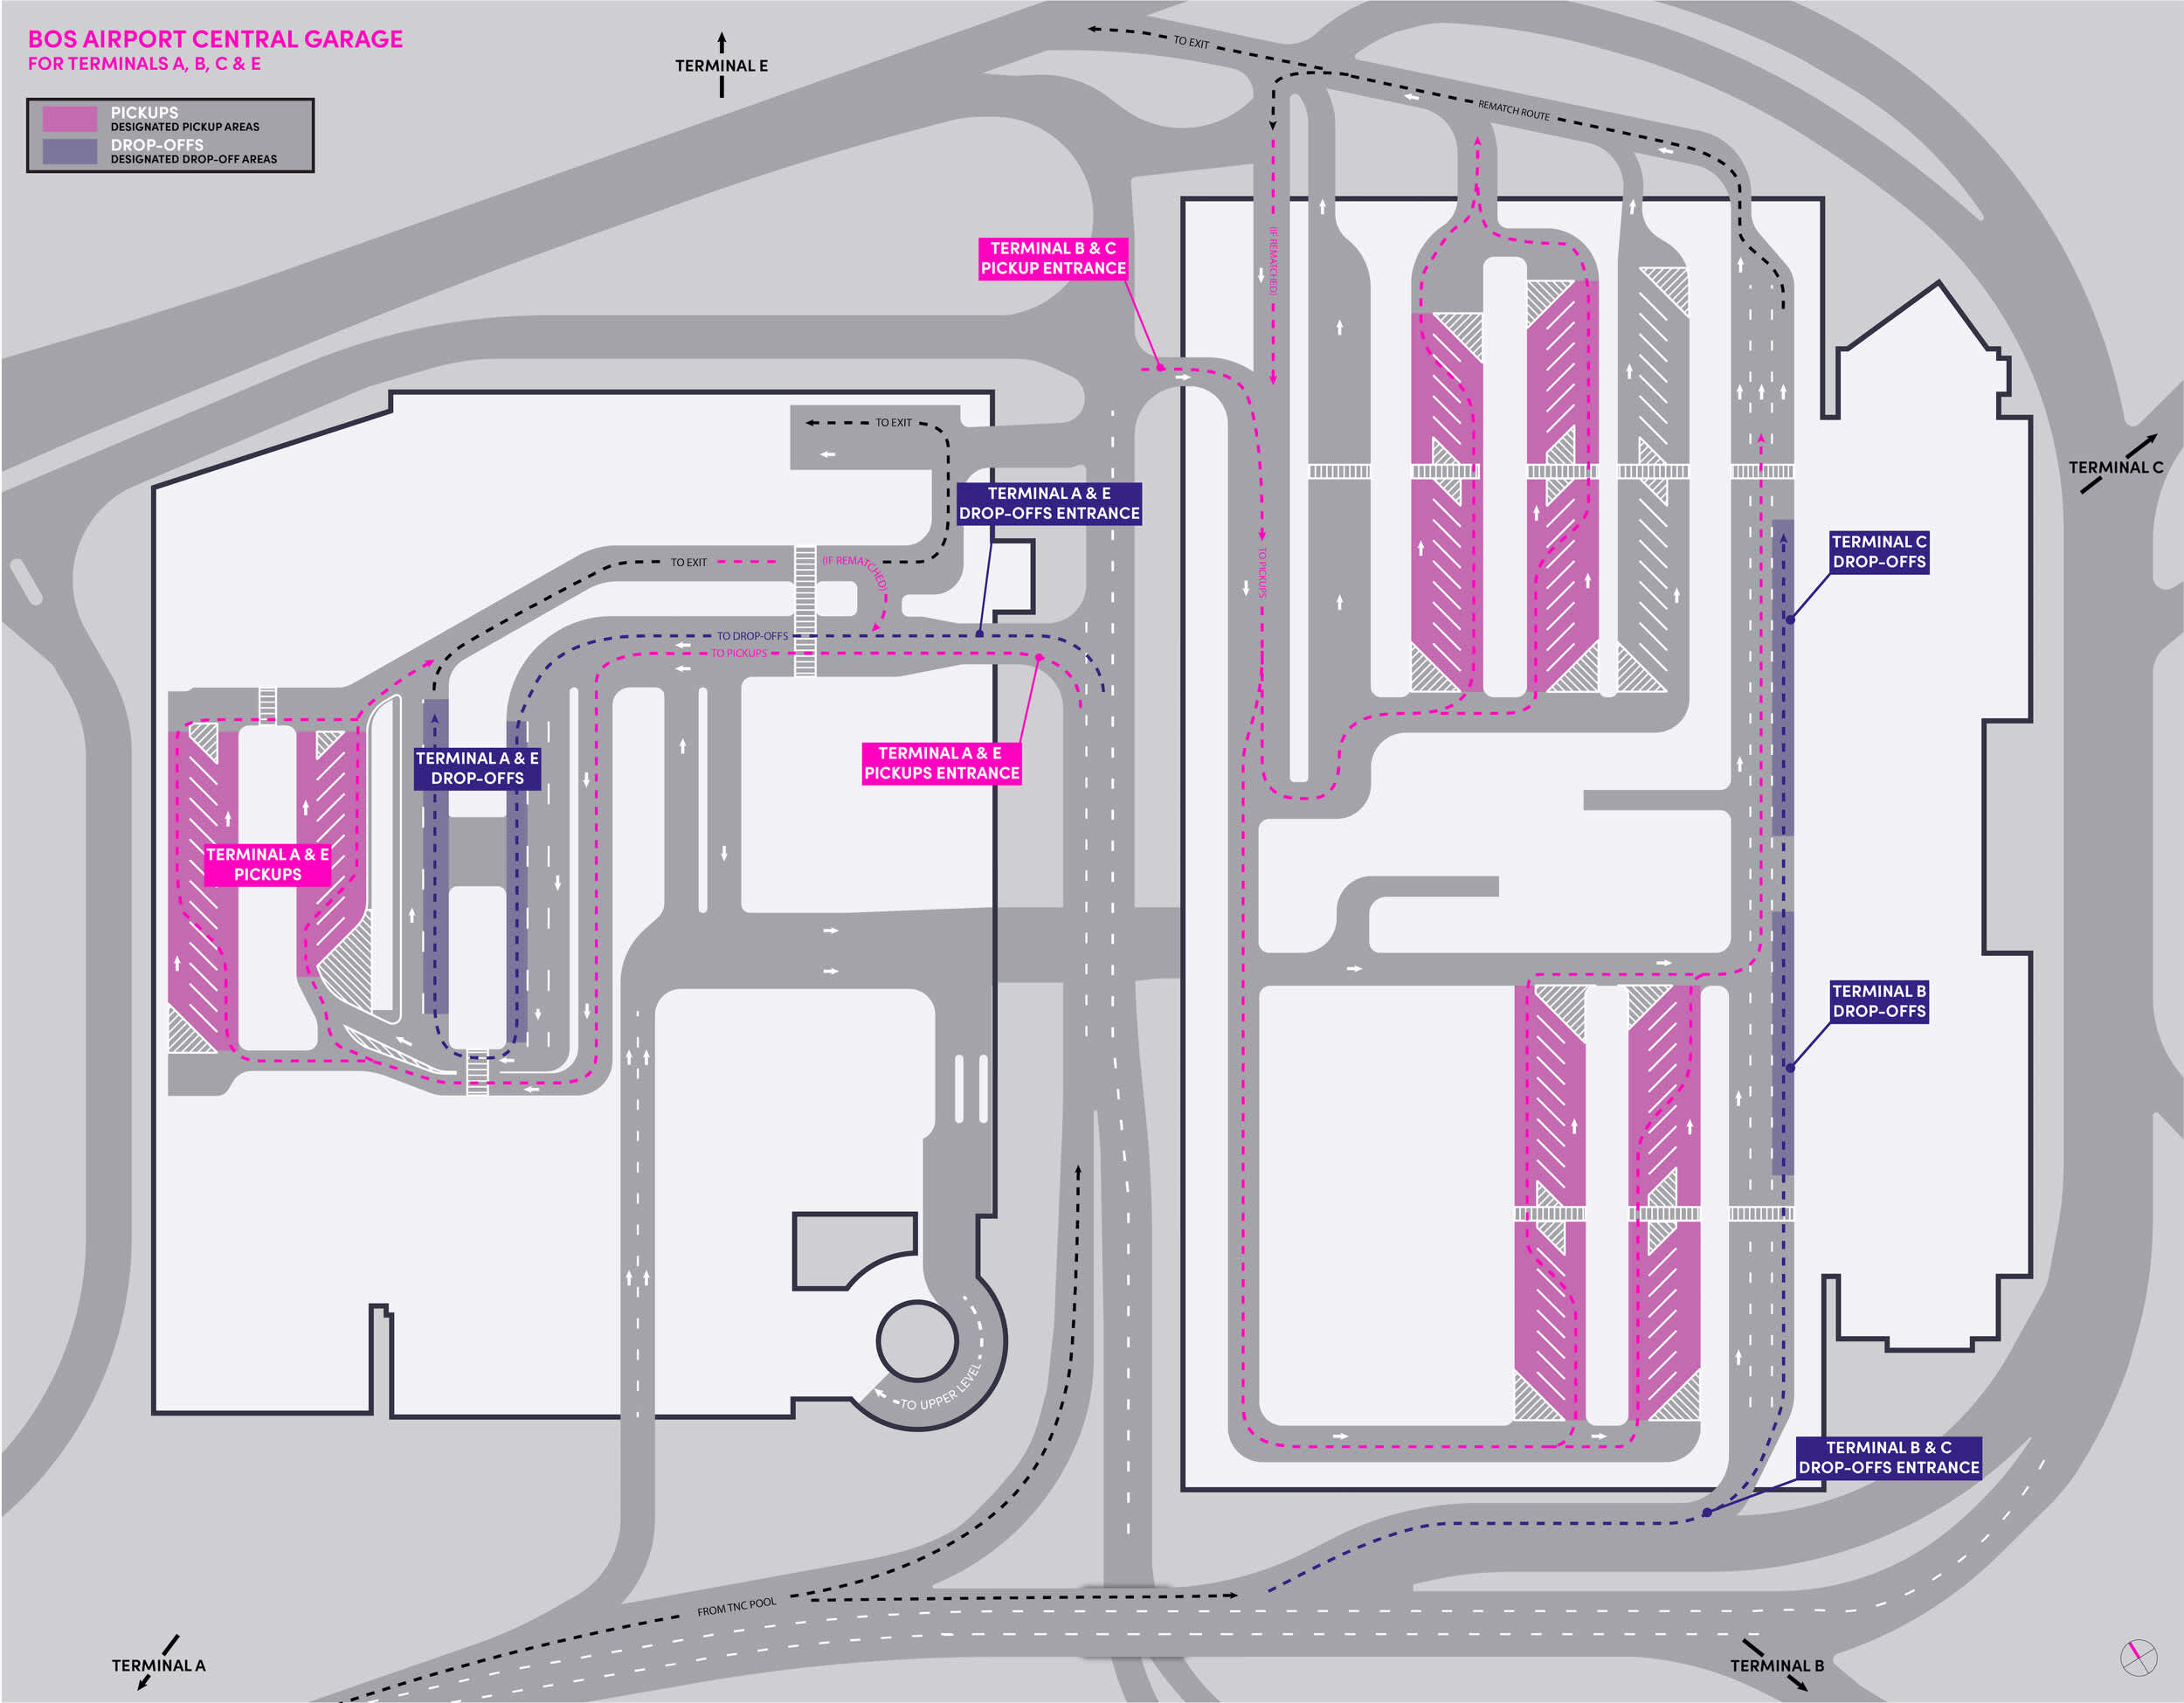 An illustrated map of the BOS Airport garage